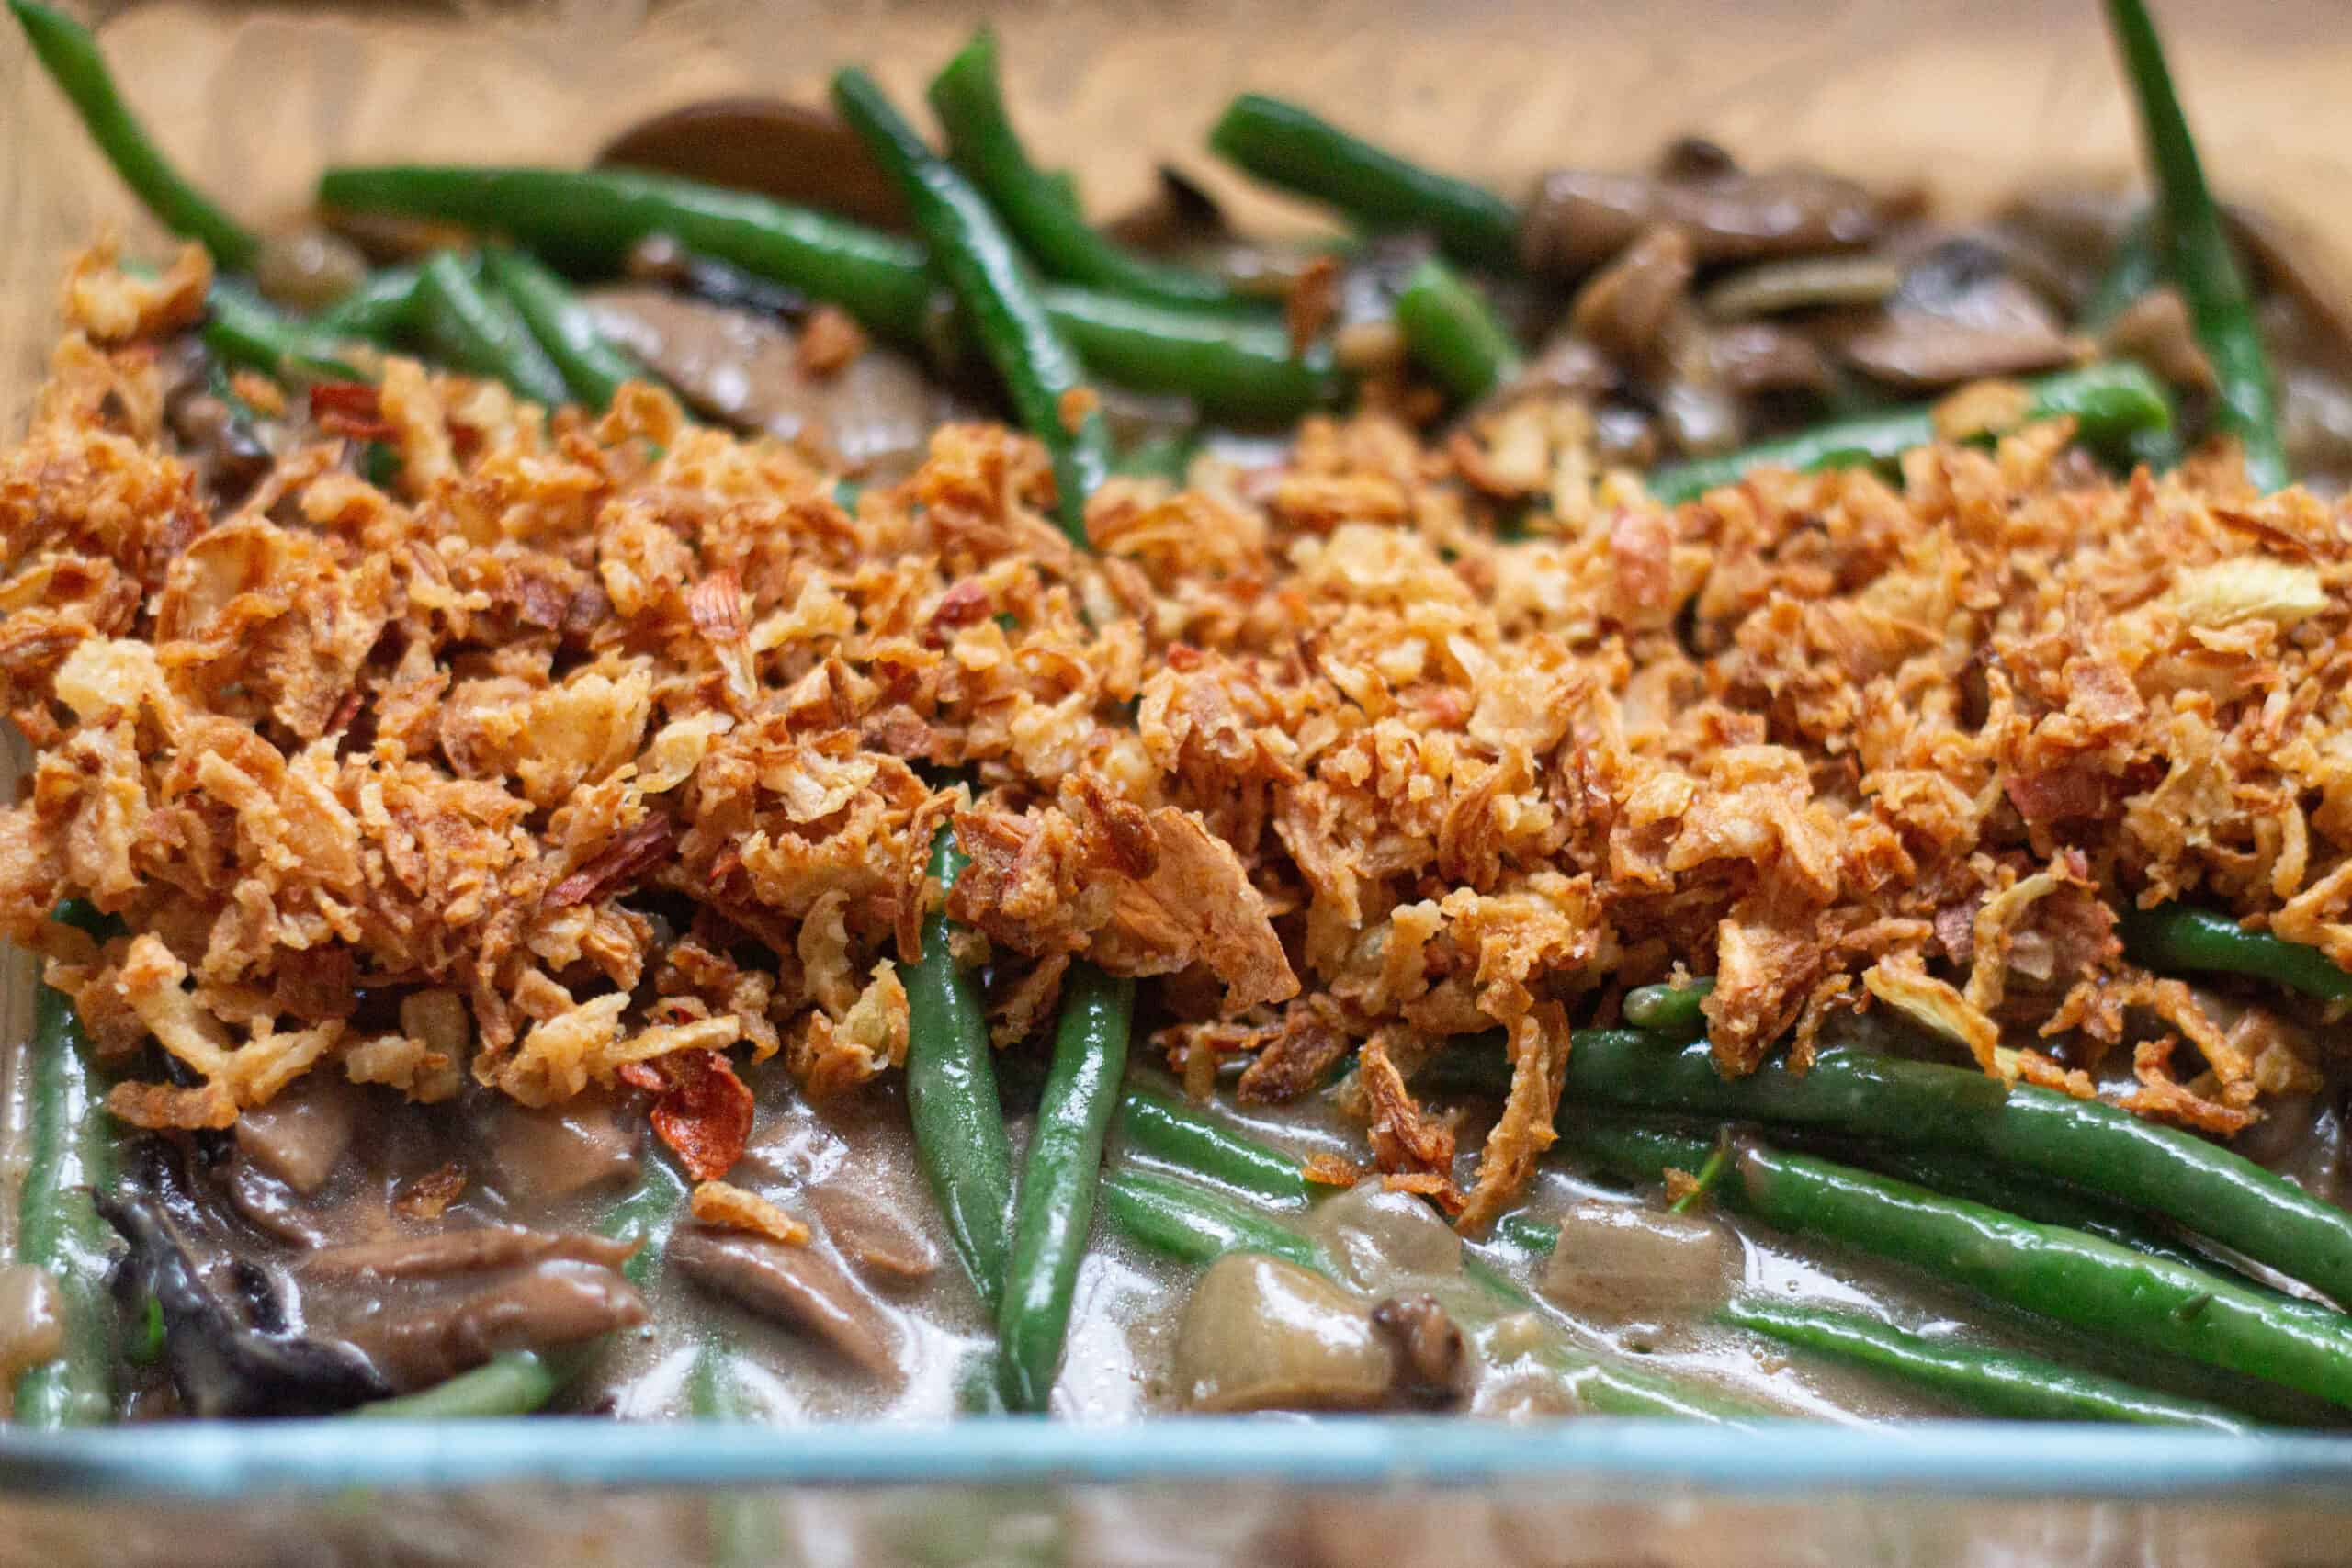 Sprinkle fried onions over the green bean casserole